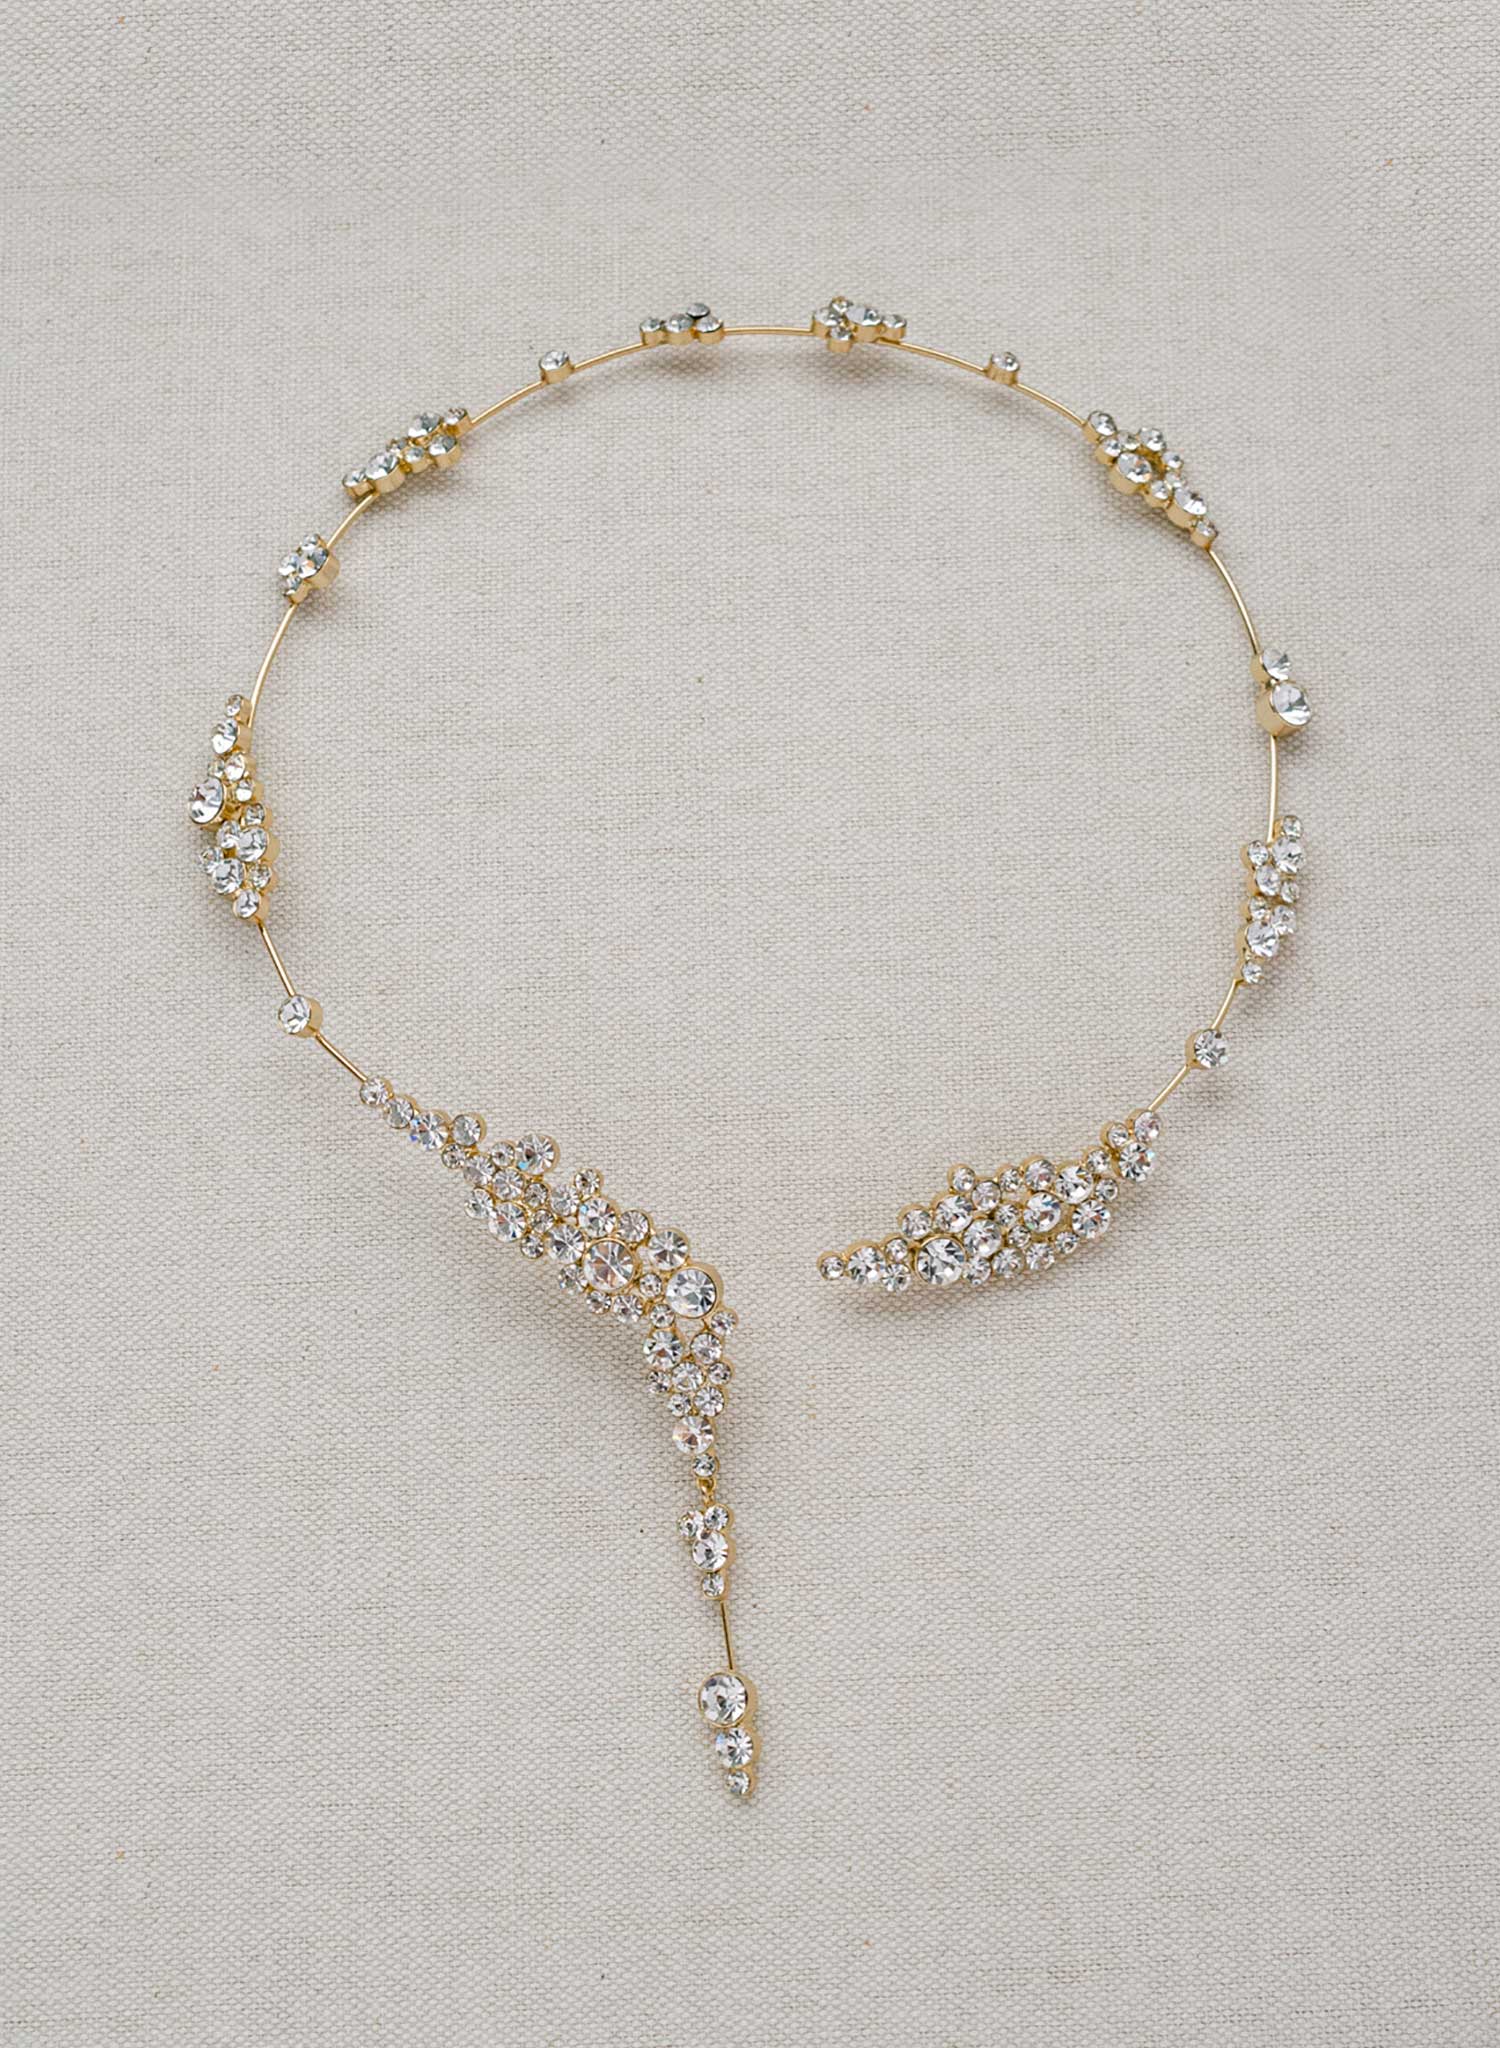 Champagne bubbles crystal necklace - Style #2419